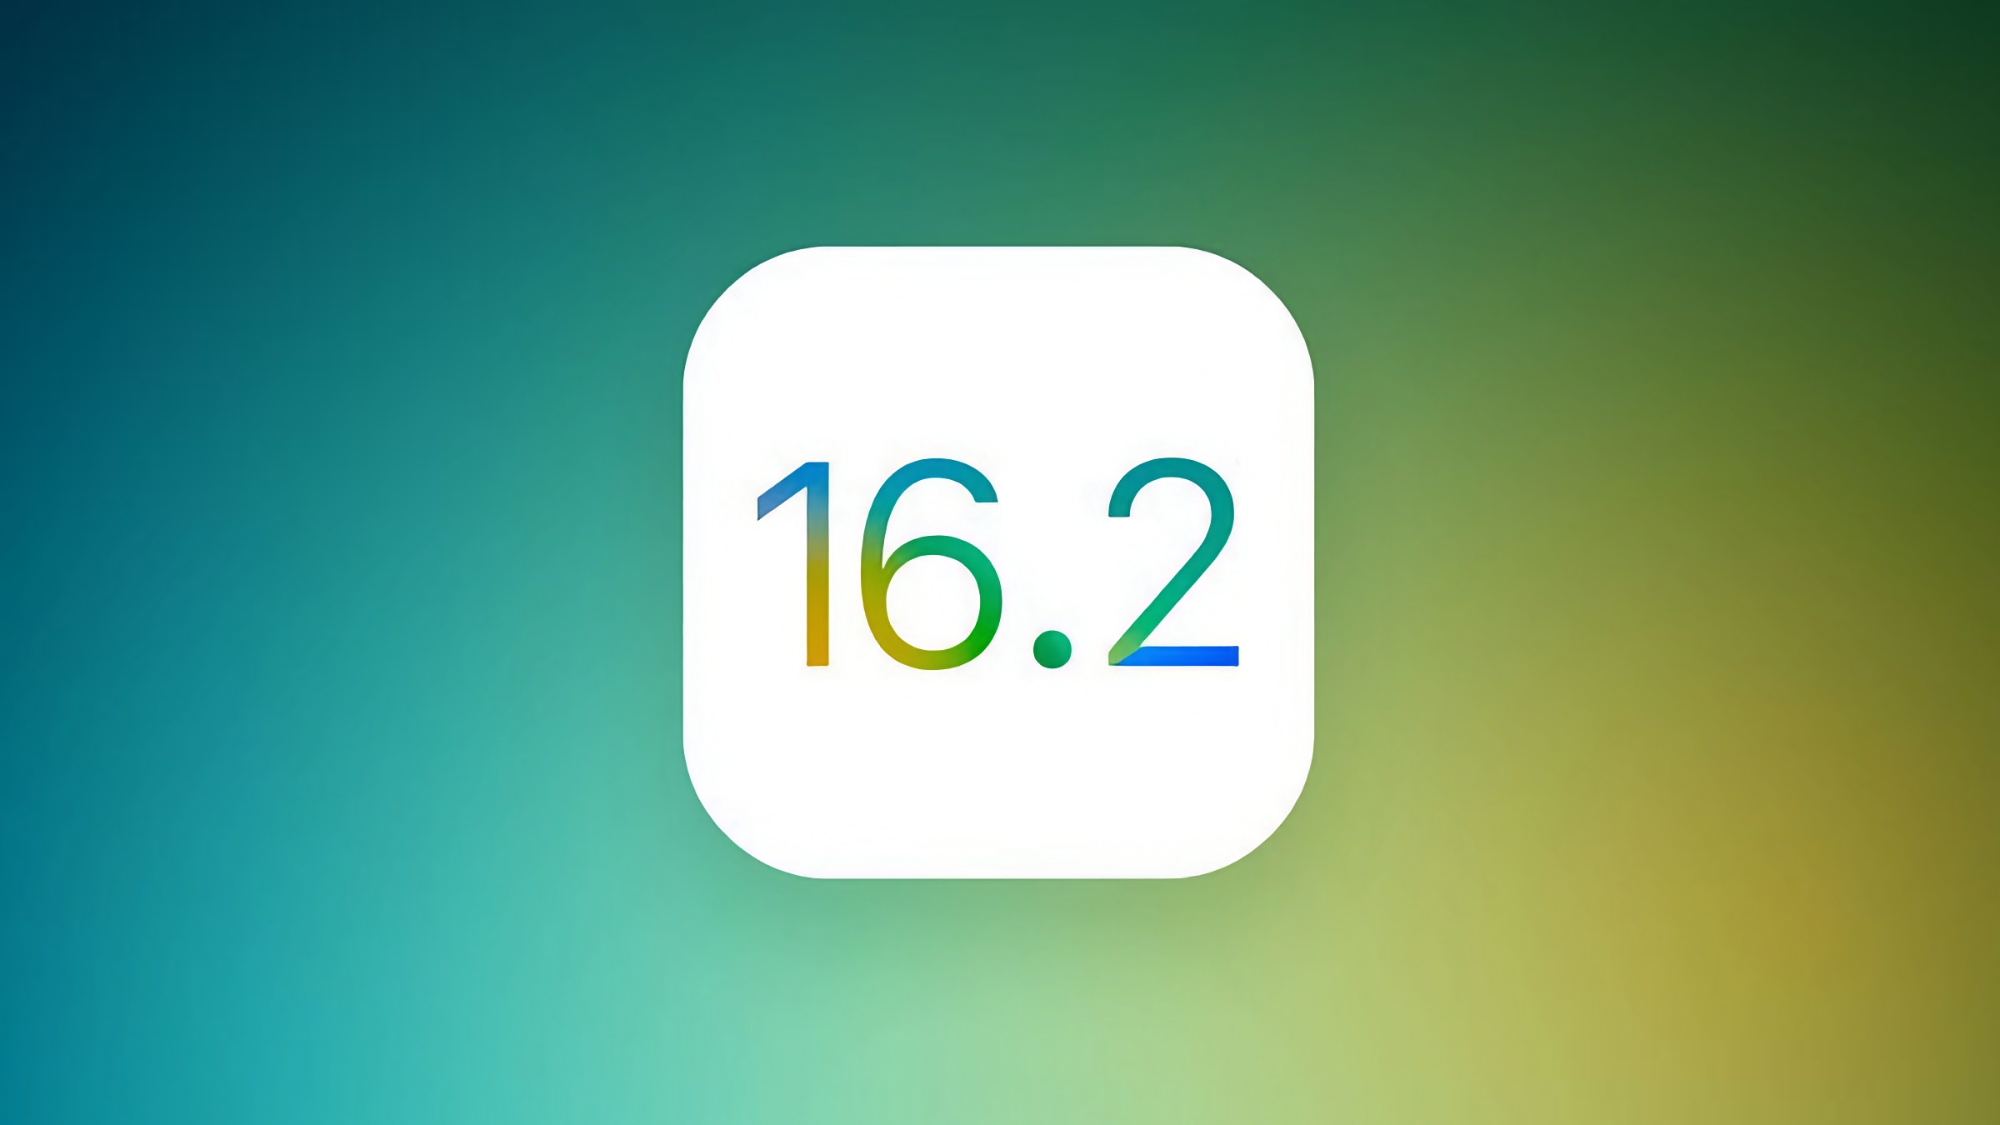 Apple launched iOS 16.2 Release Candidate with many small but useful changes